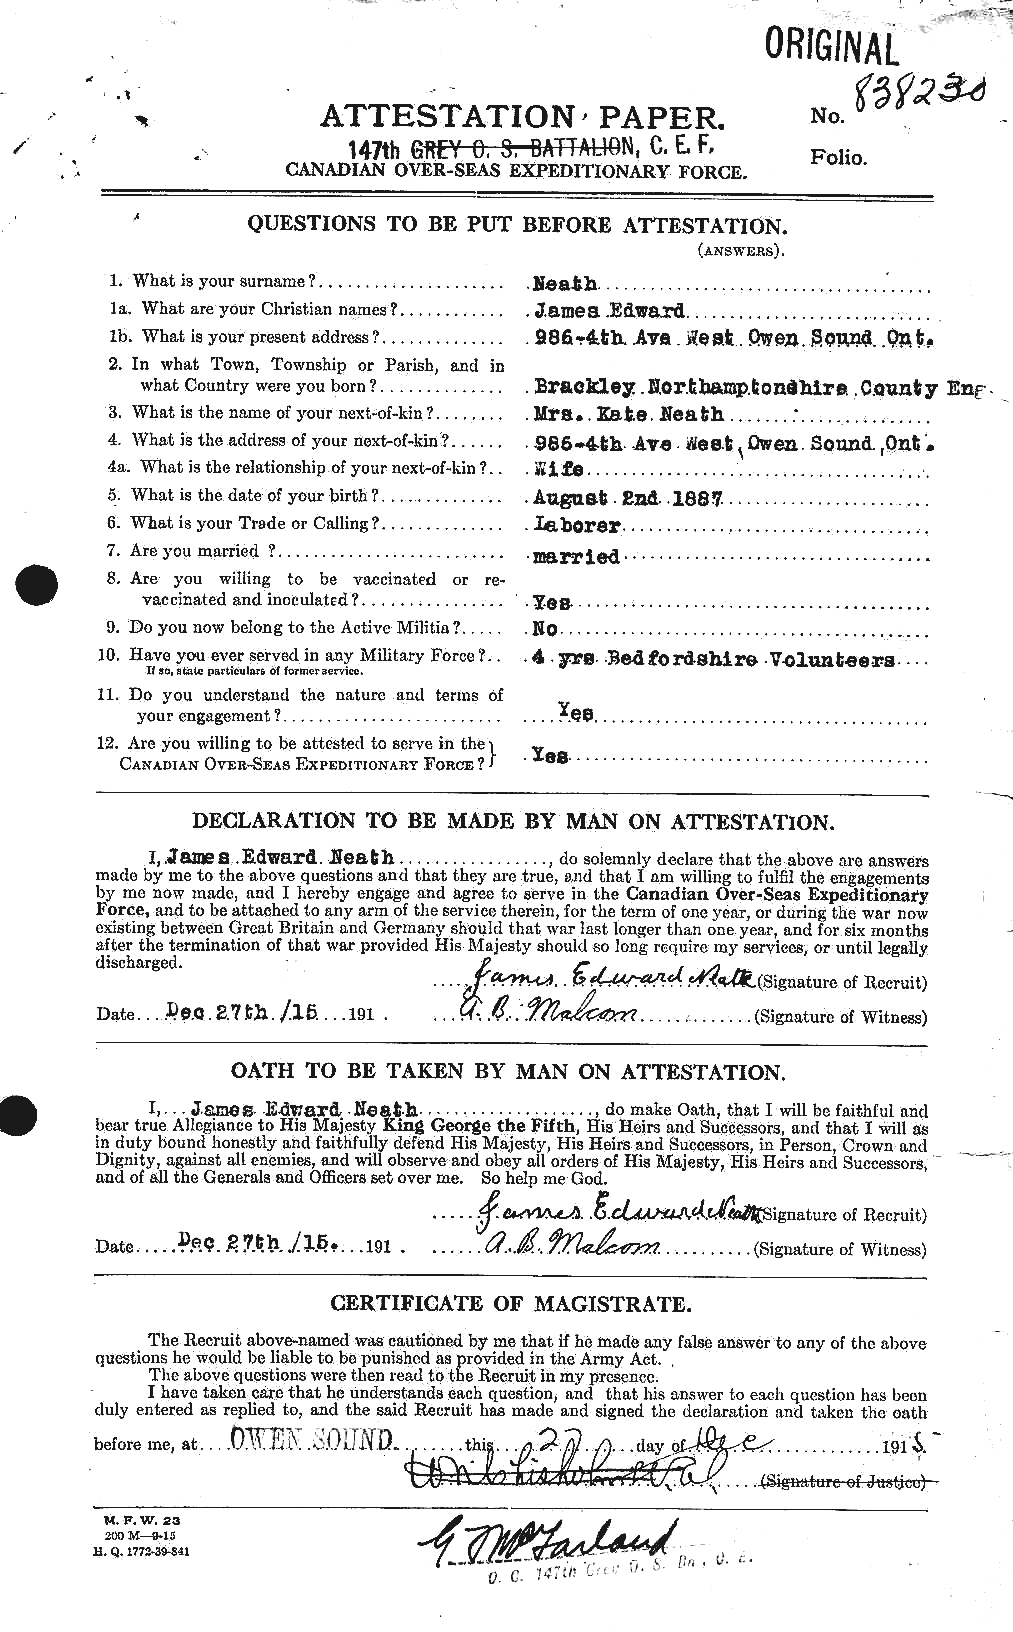 Personnel Records of the First World War - CEF 545071a